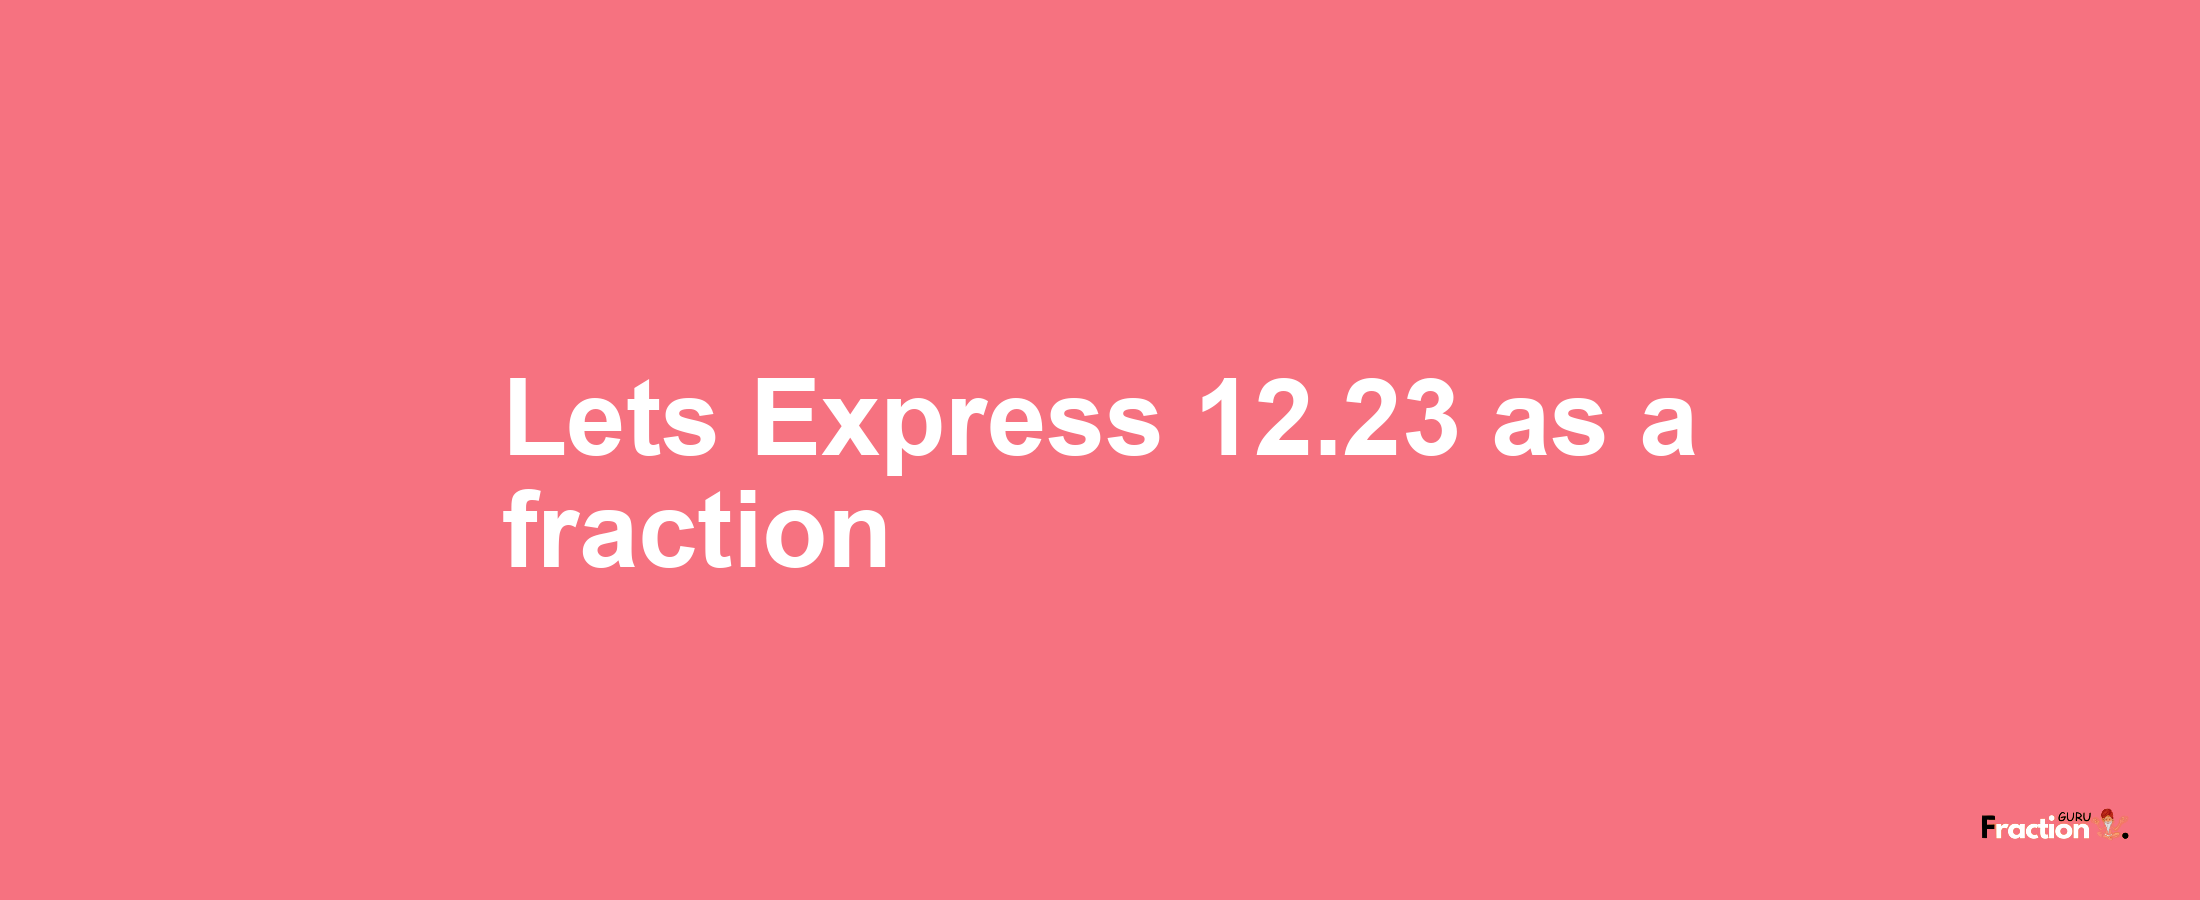 Lets Express 12.23 as afraction